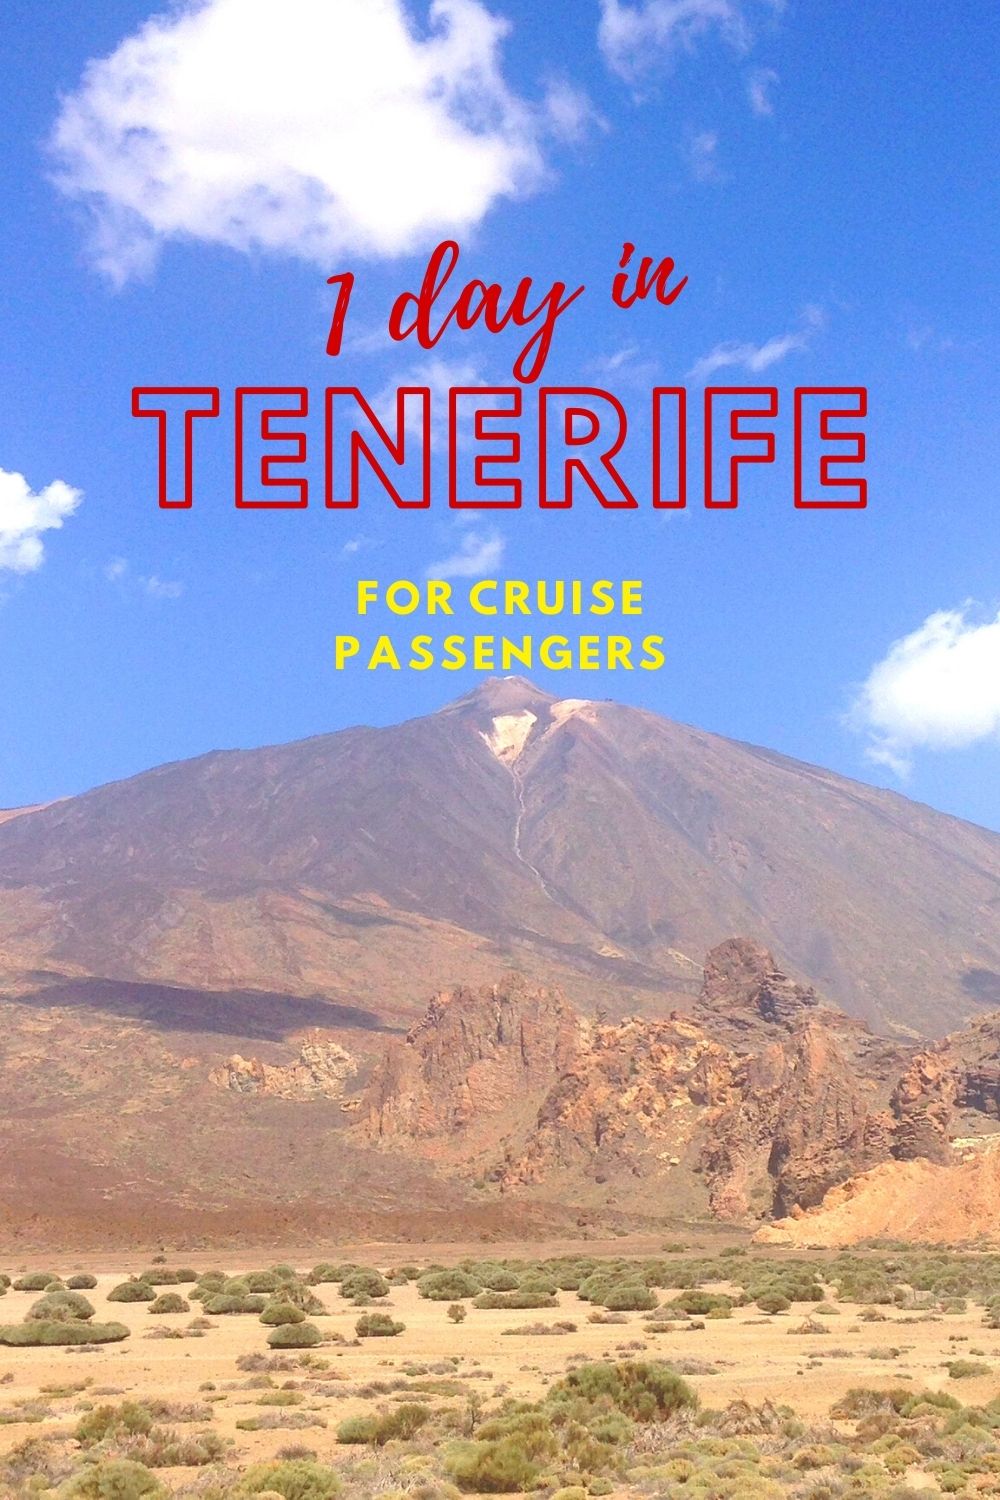 One day in Tenerife - Advice & Itinerary for Cruise Passengers